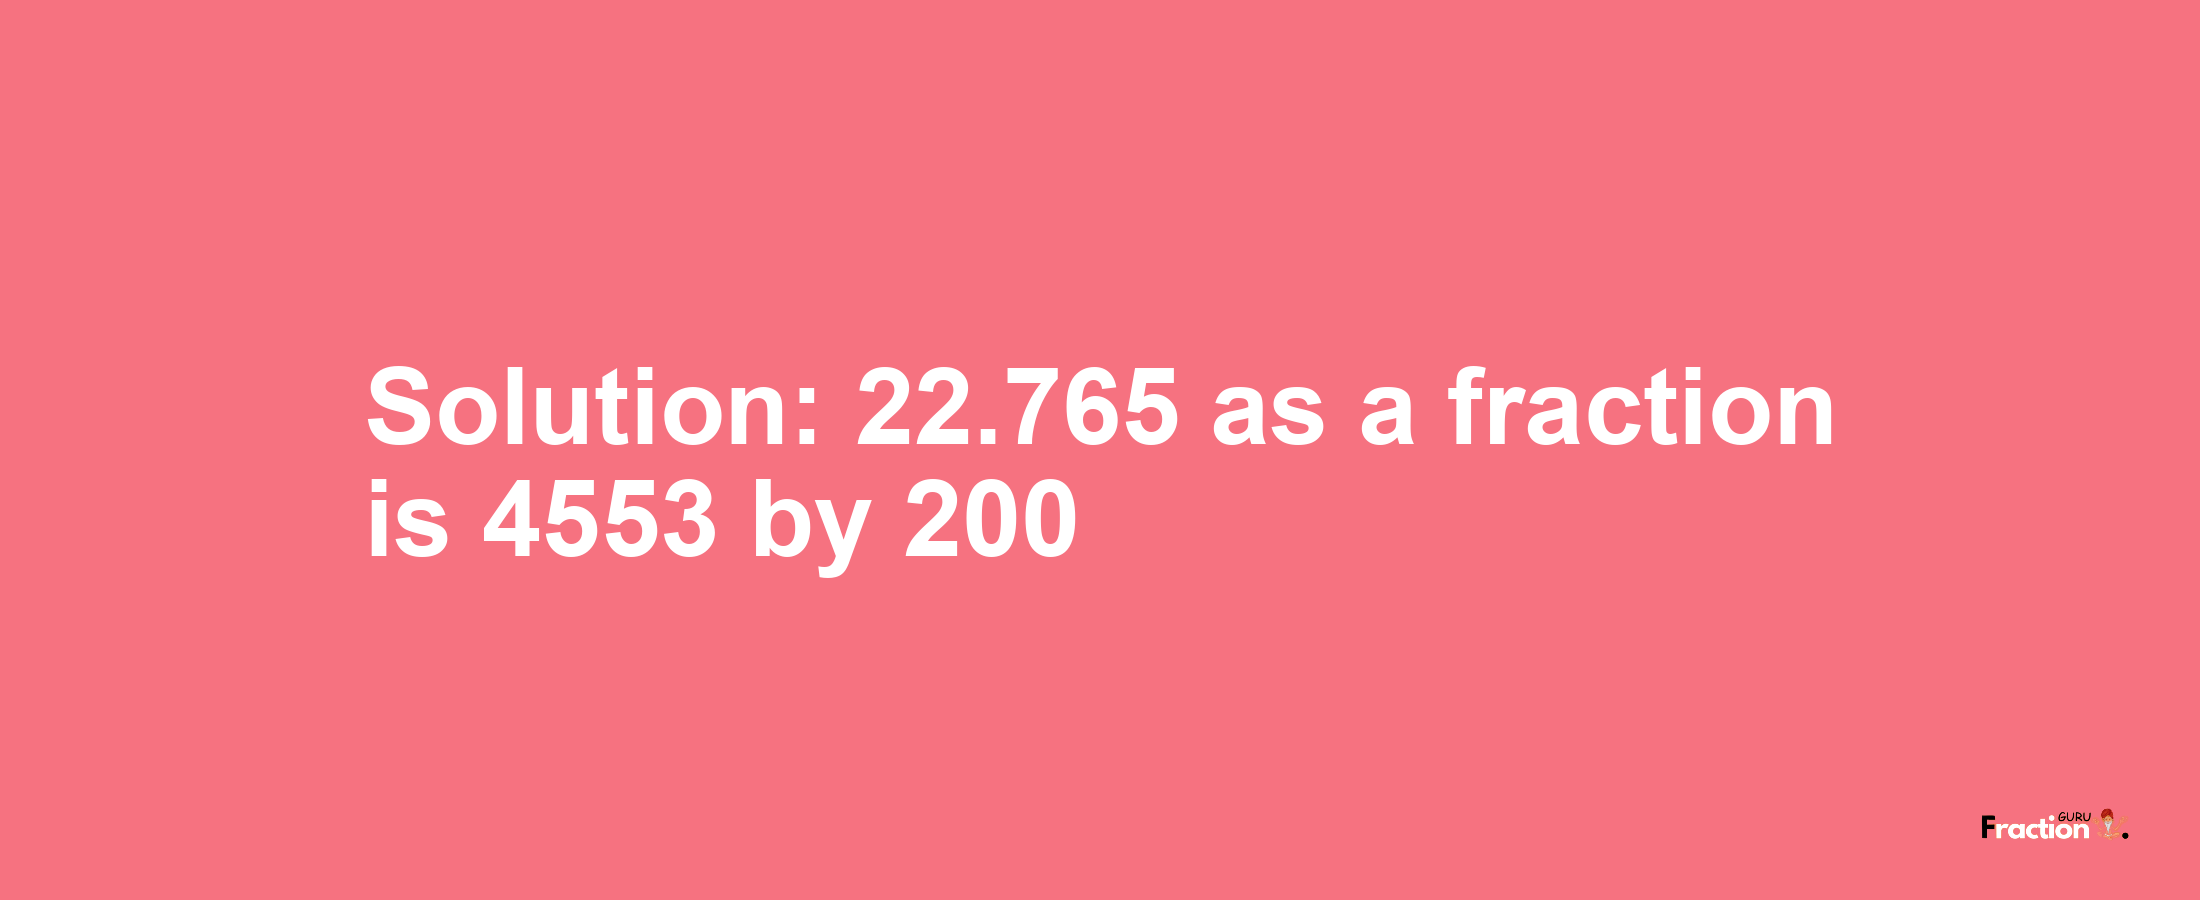 Solution:22.765 as a fraction is 4553/200